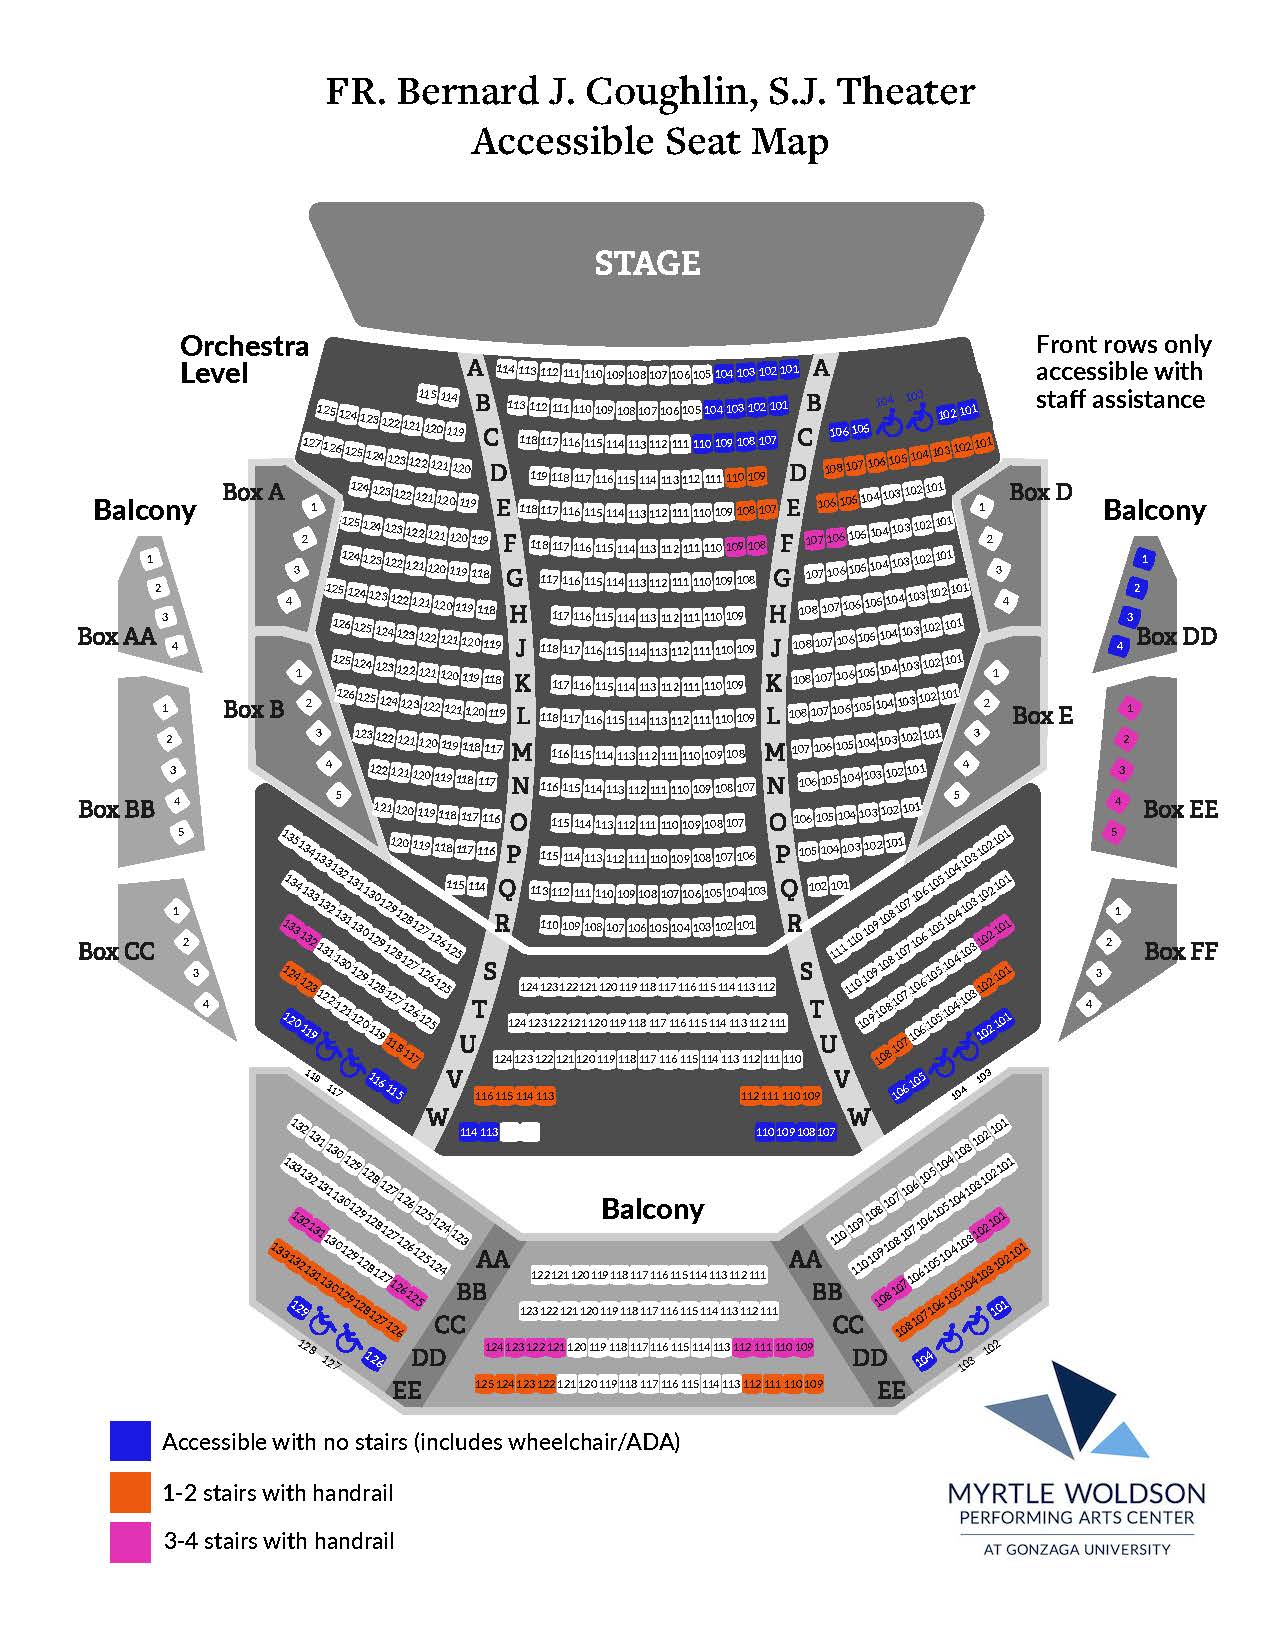 Coughlin Theater Accessible Seating Map